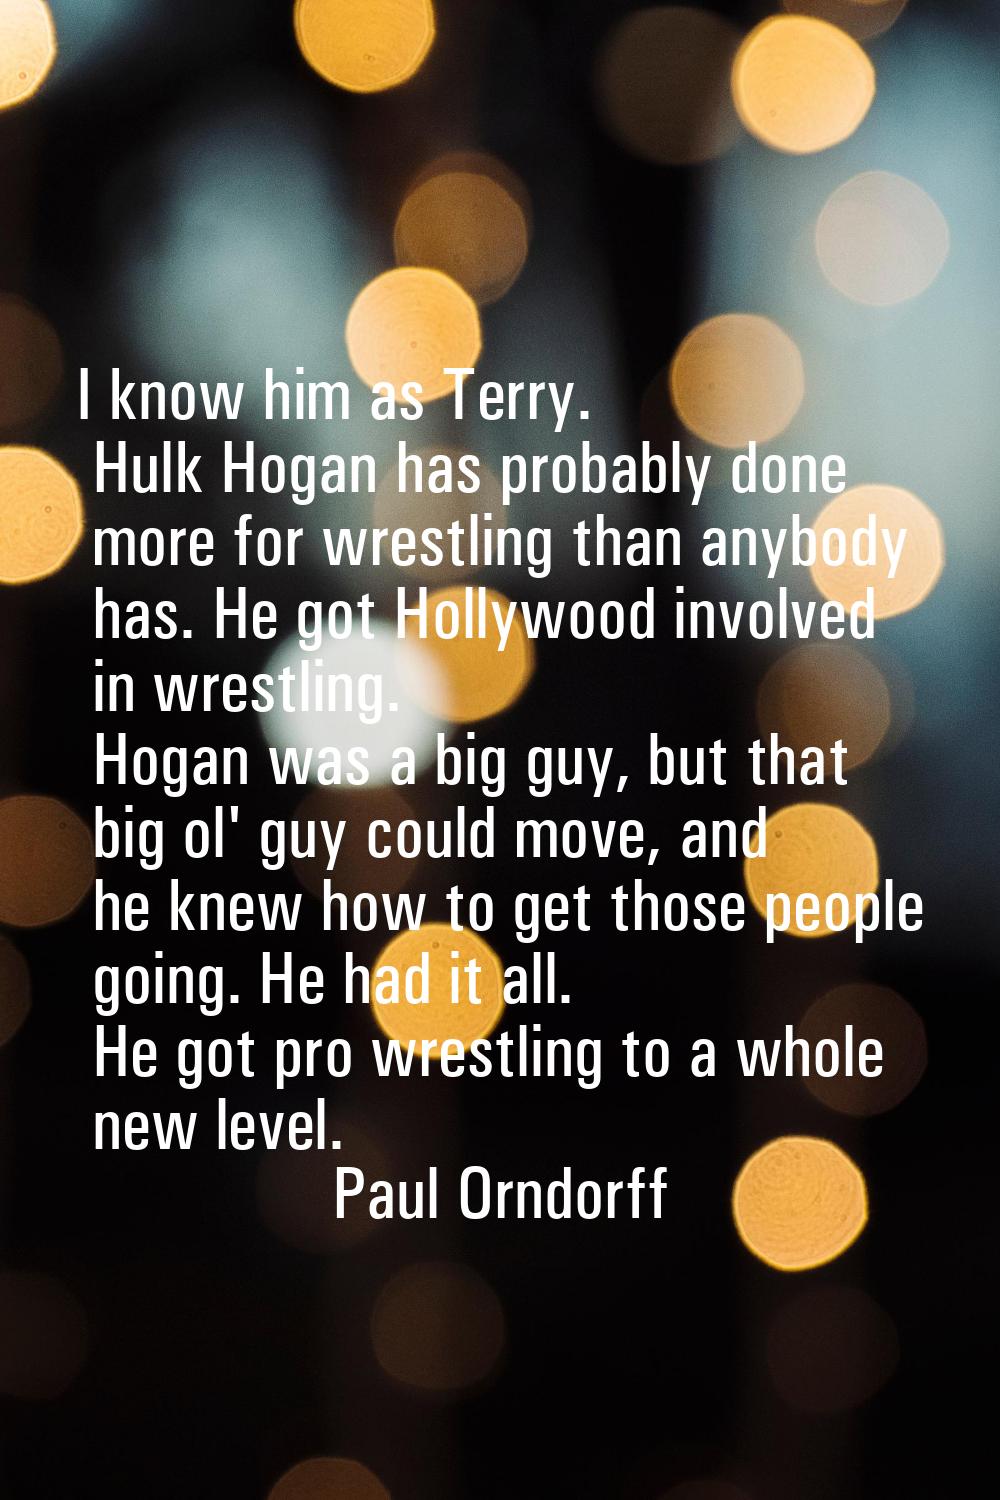 I know him as Terry. Hulk Hogan has probably done more for wrestling than anybody has. He got Holly